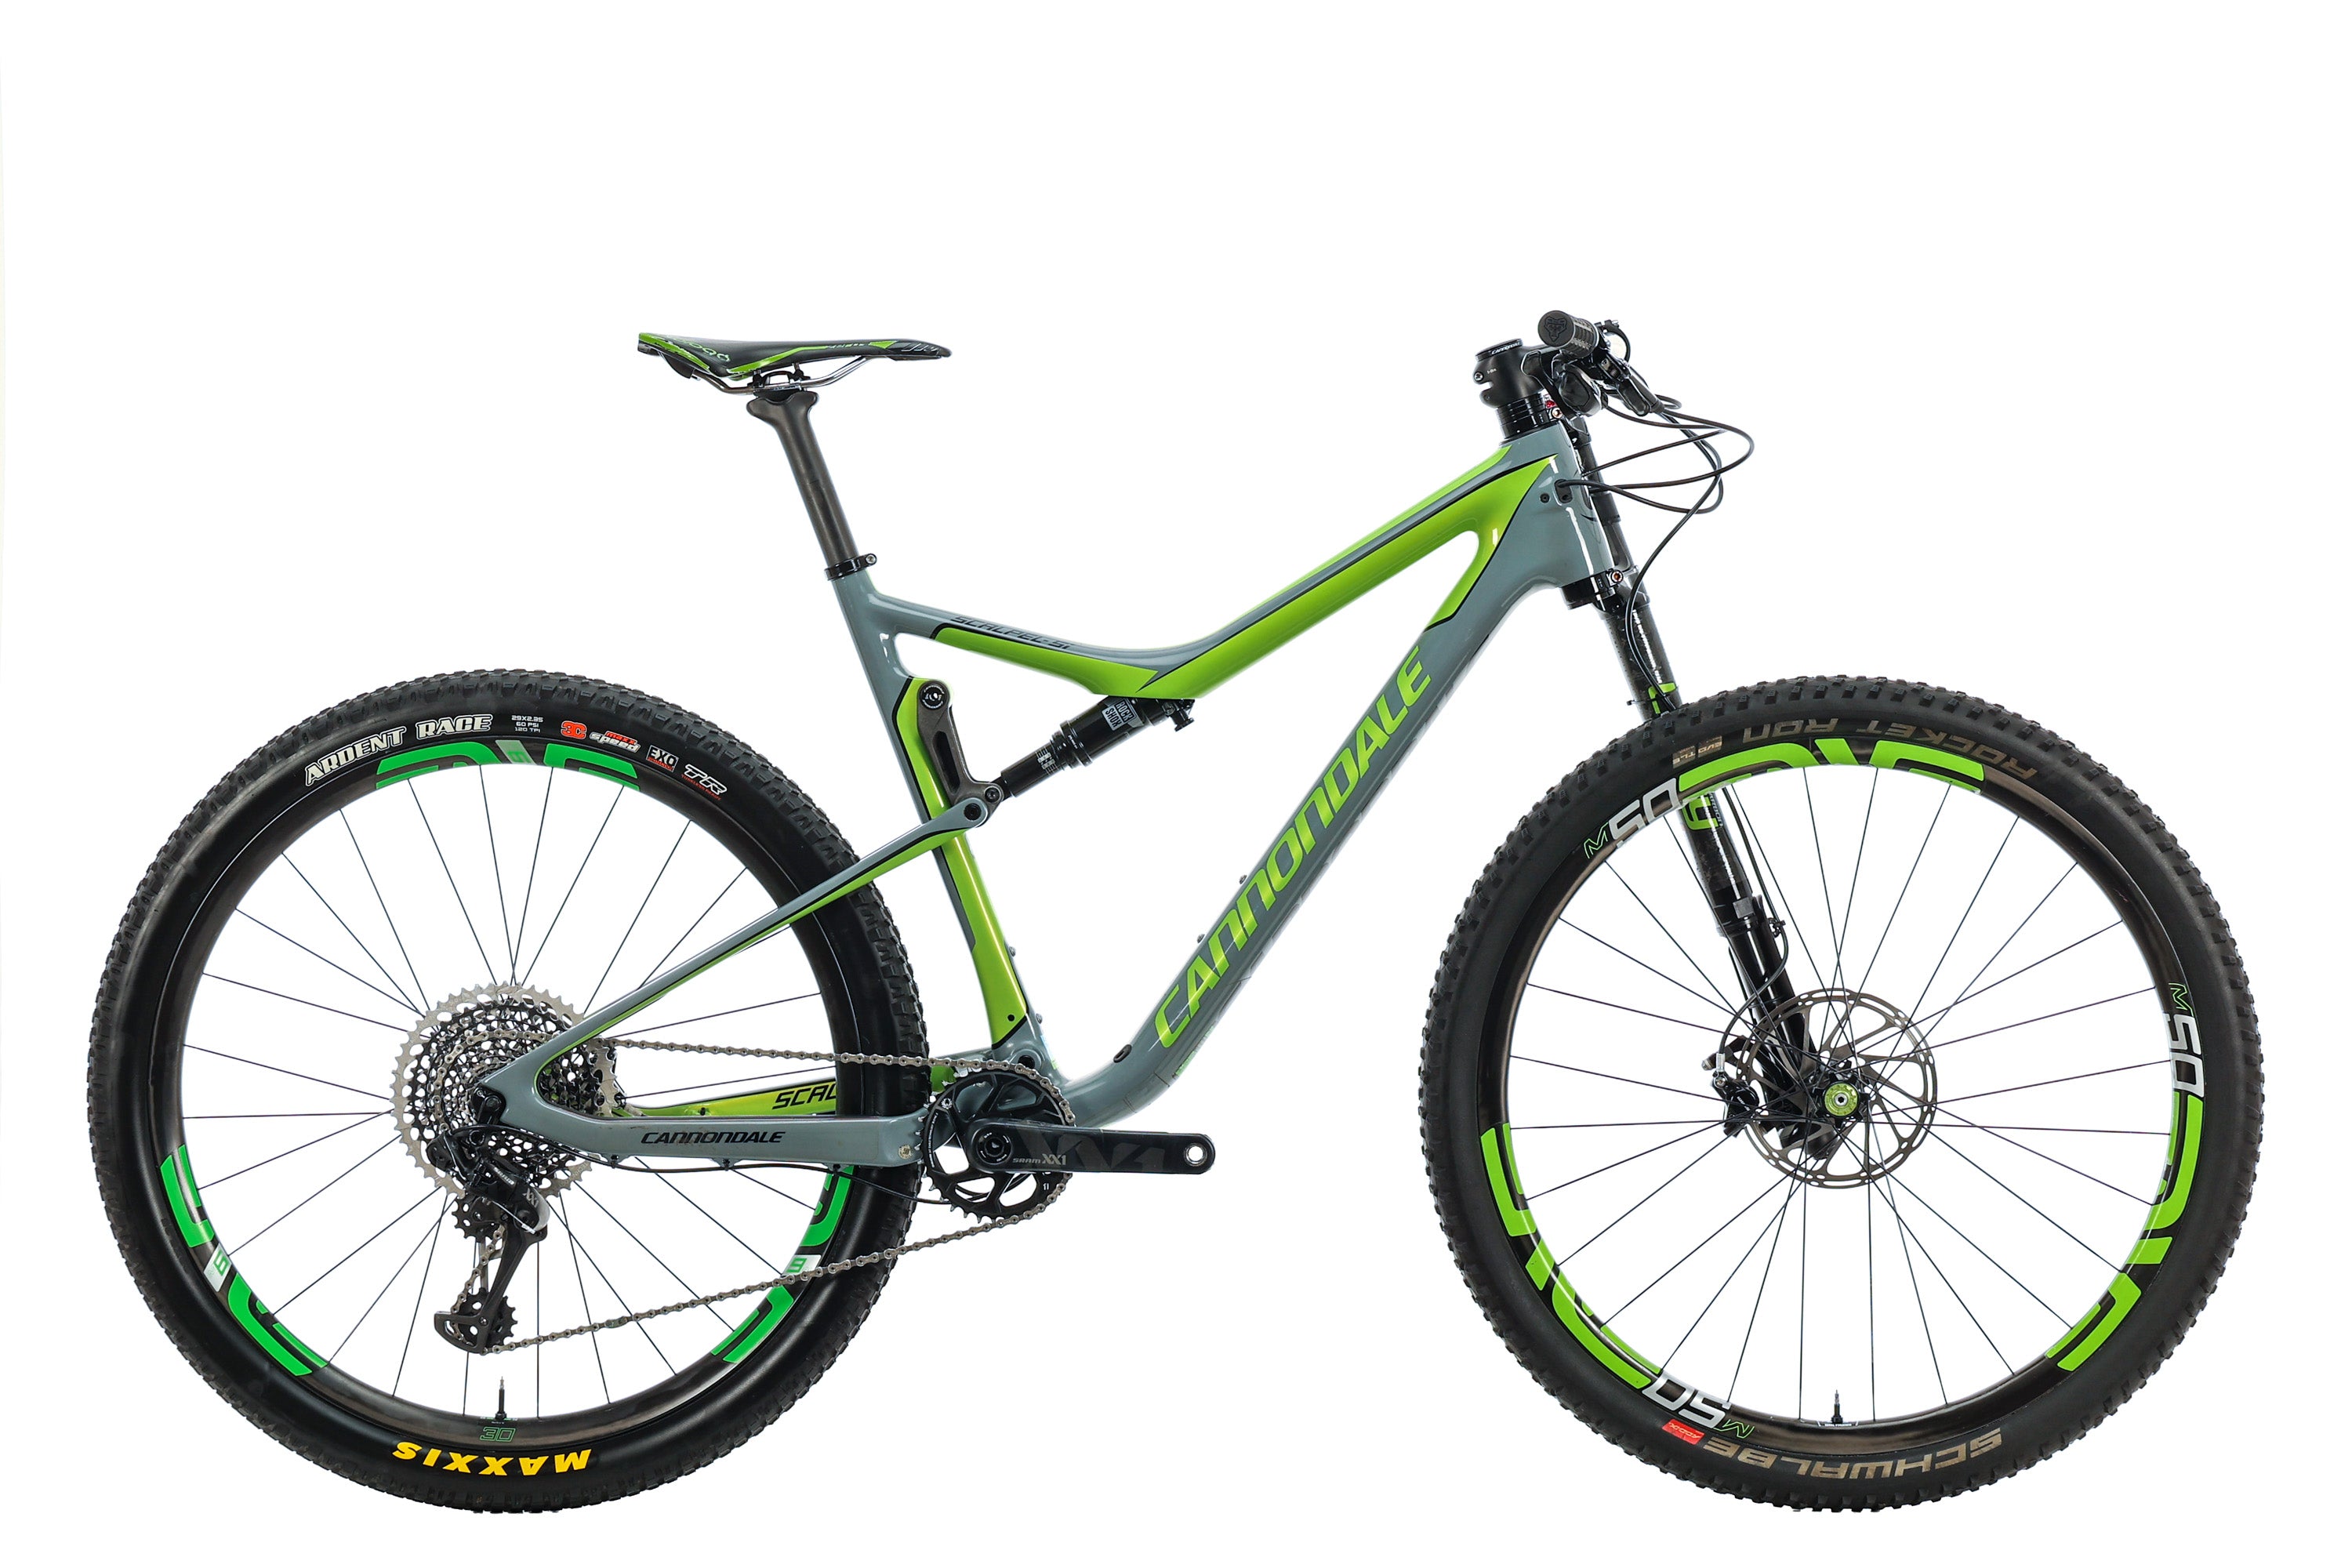 Cannondale Scalpel-Si Team Mountain Bike - 2018, X-Large Weight, Price, Specs, Geometry, Size Guide | The Pro's Closet